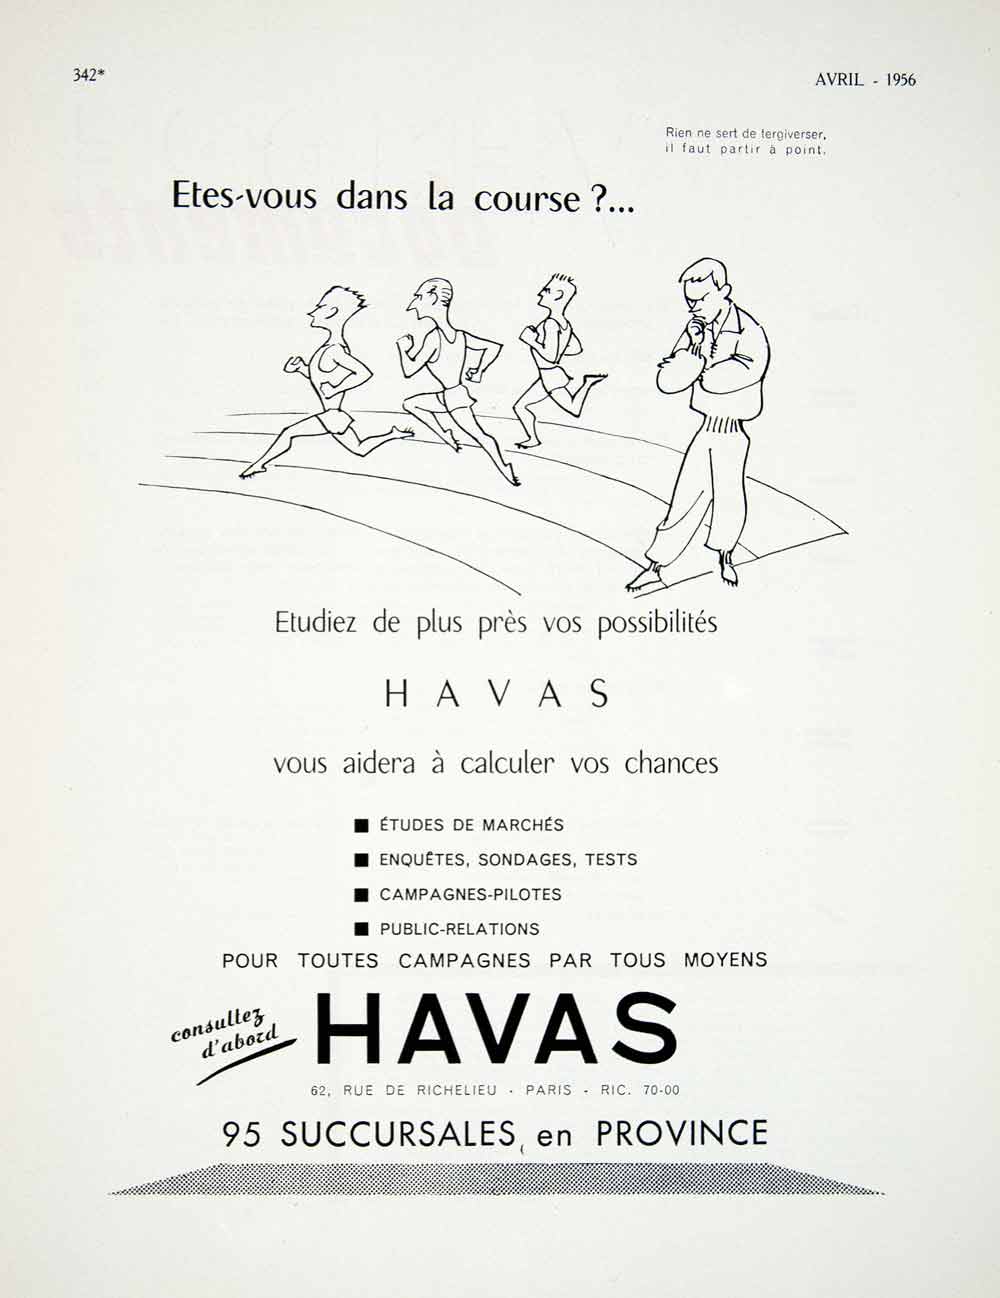 1956 Ad Havas French Advertising Agency Race Runners Running Firm Marketing VEN6